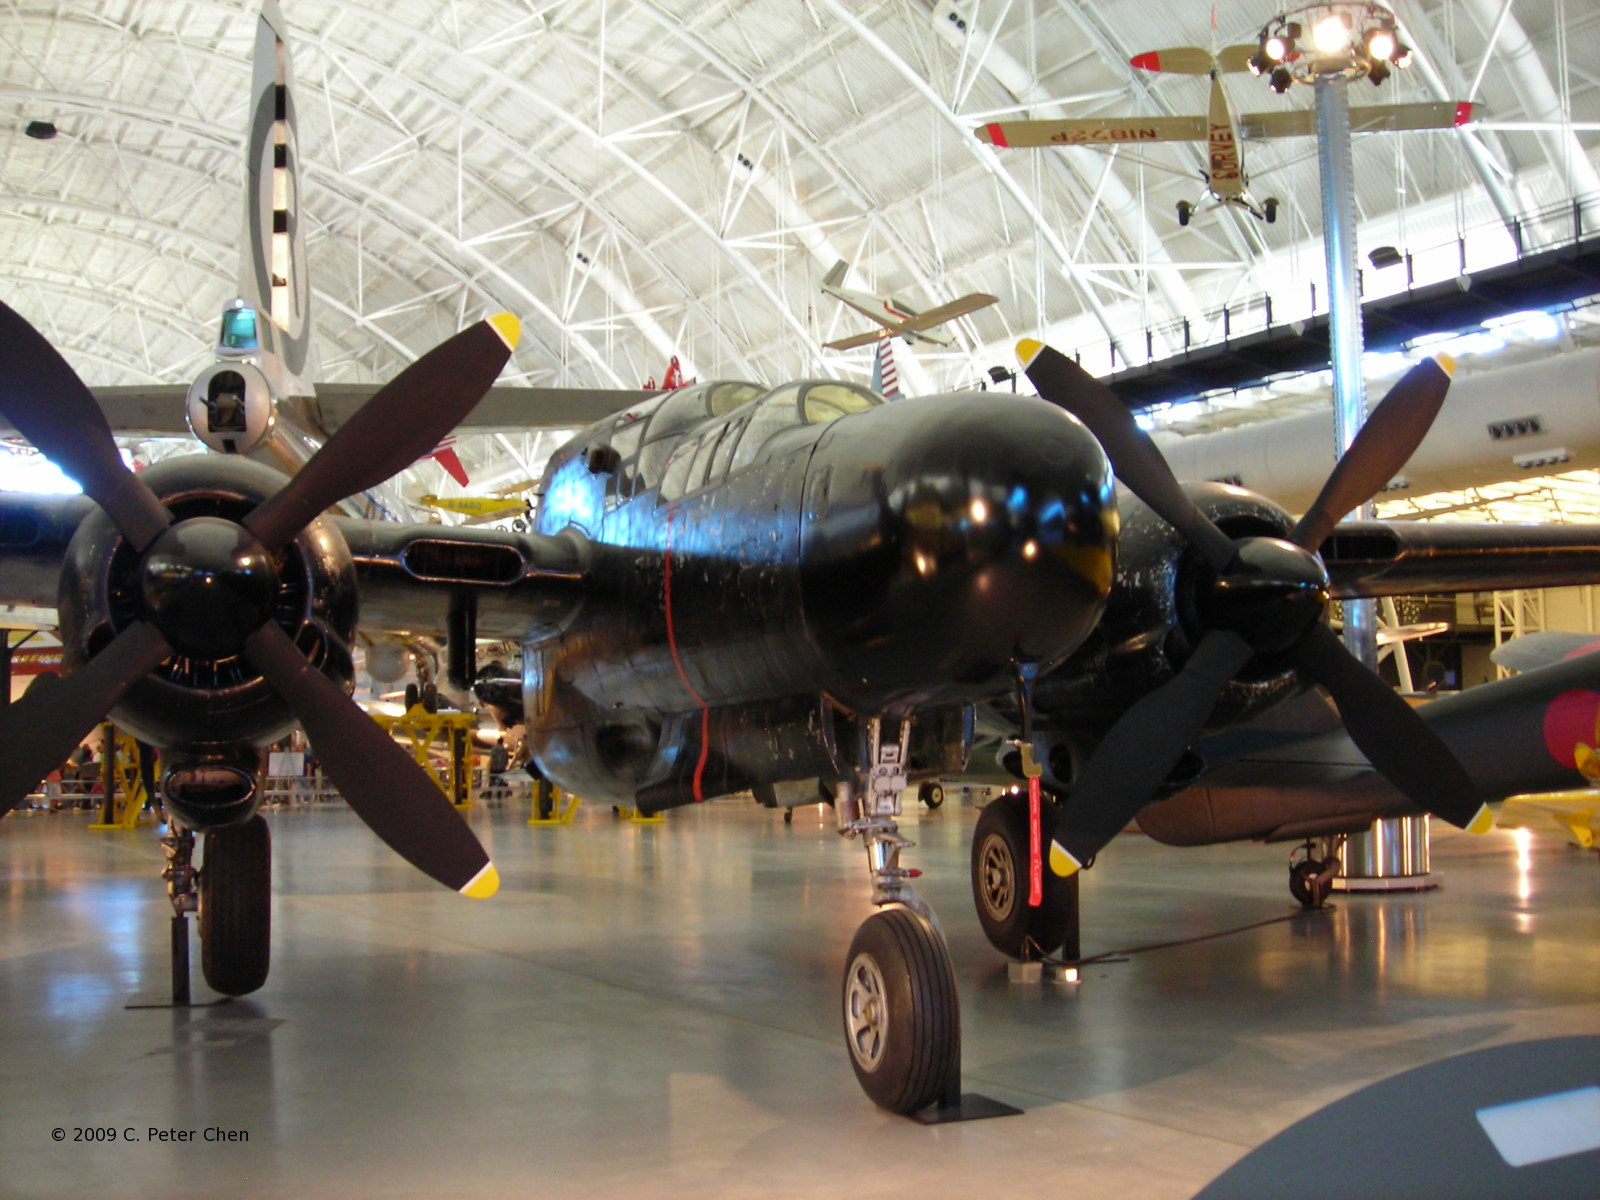 P-61C Black Widow aircraft on display at Smithsonian Air and Space Museum Udvar-Hazy Center, Chantilly, Virginia, United States, 26 Apr 2009